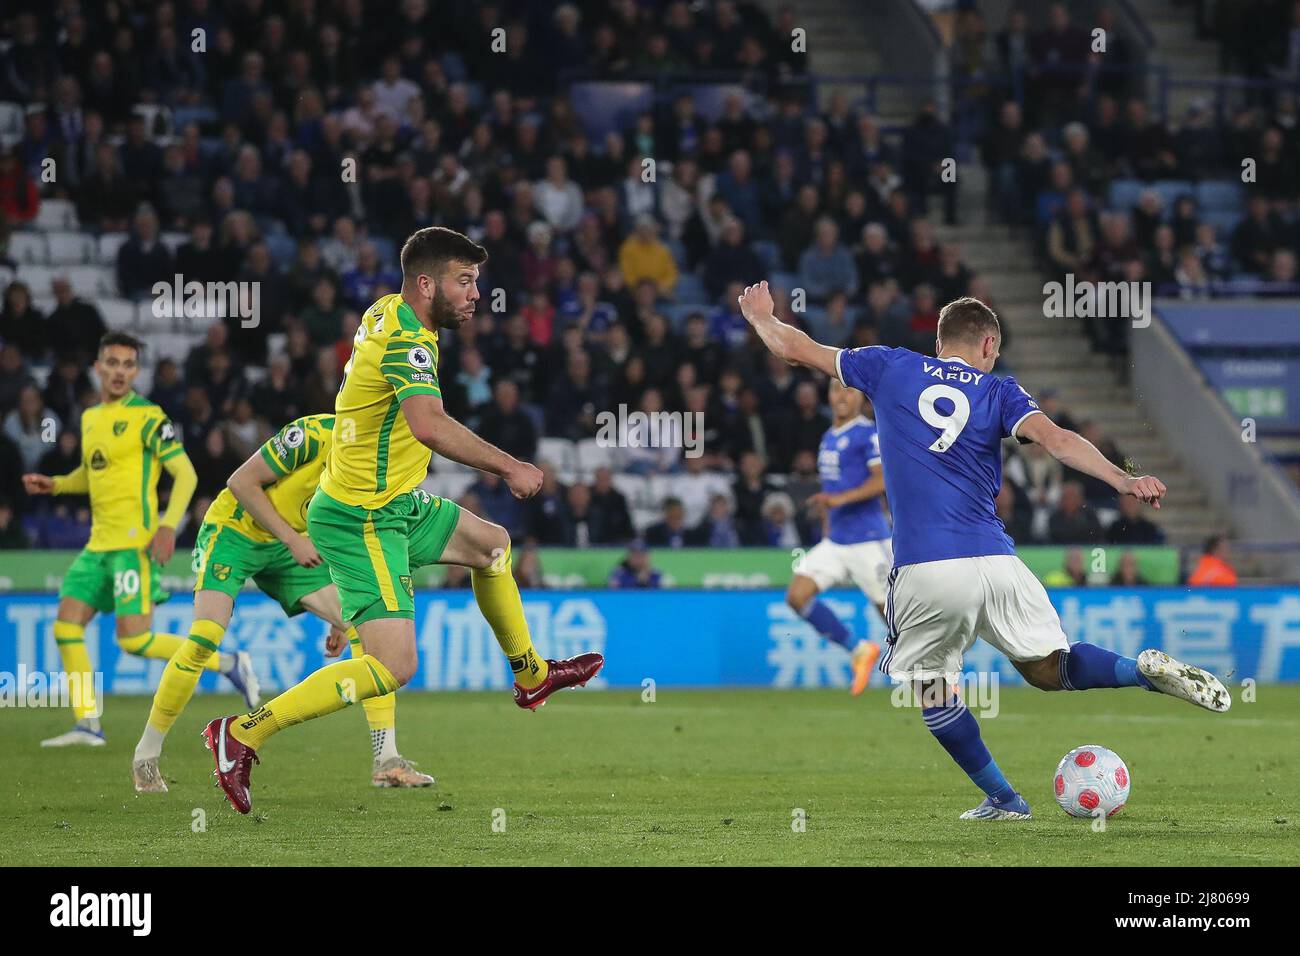 Jamie Vardy #9 of Leicester City takes a shot which deflects off Grant Hanley #5 of Norwich City and goes in to make it 1-0 Stock Photo